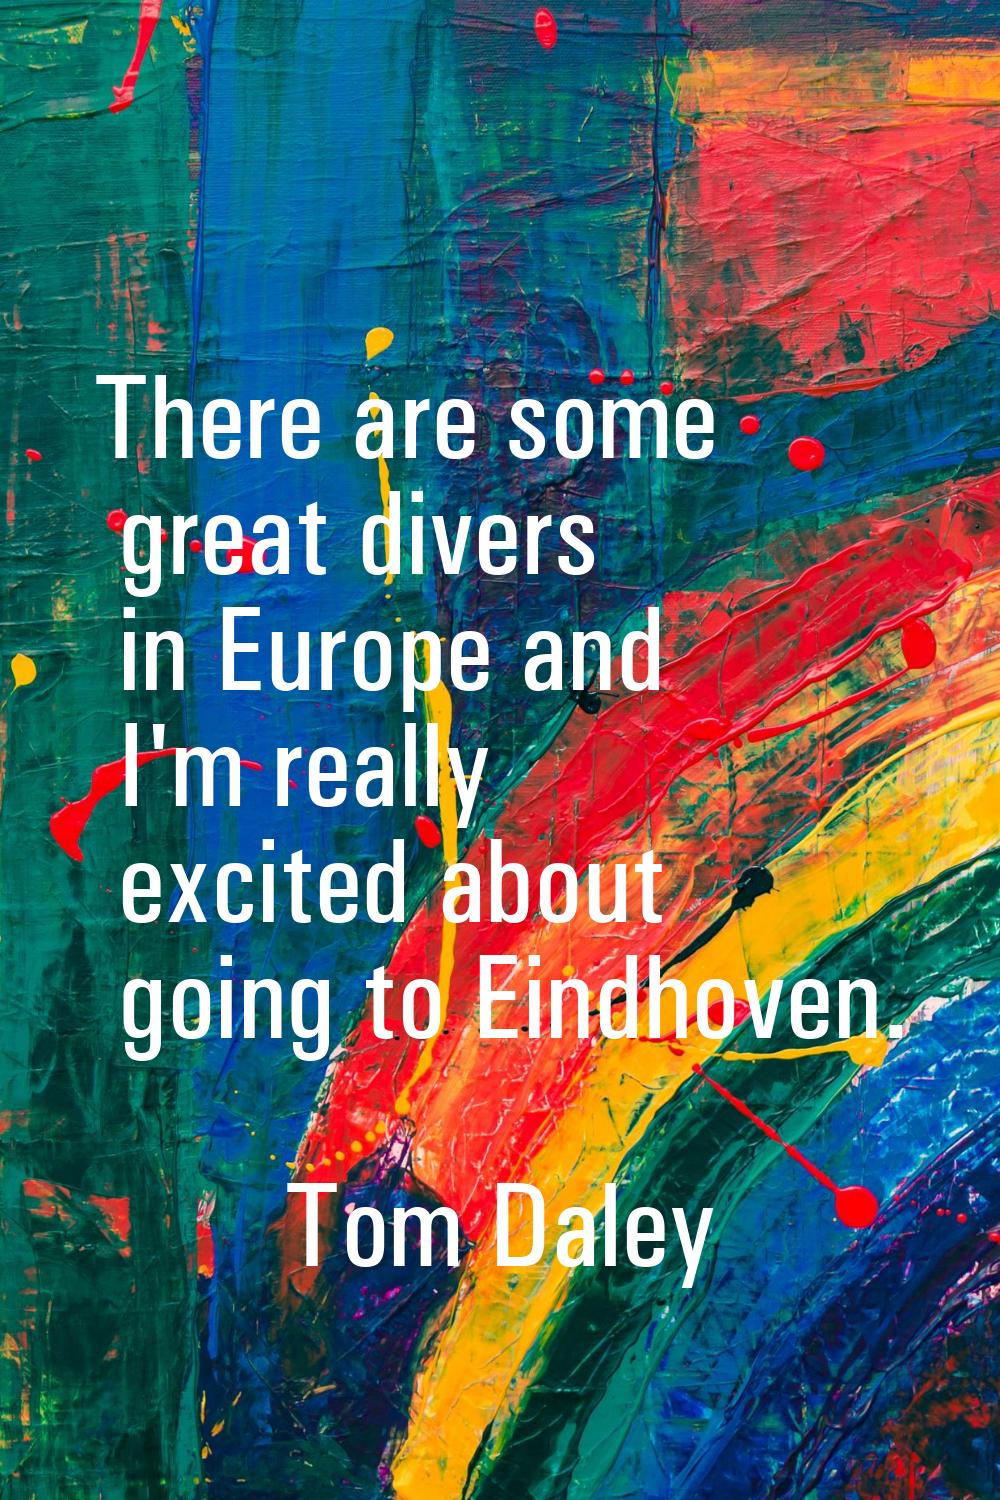 There are some great divers in Europe and I'm really excited about going to Eindhoven.